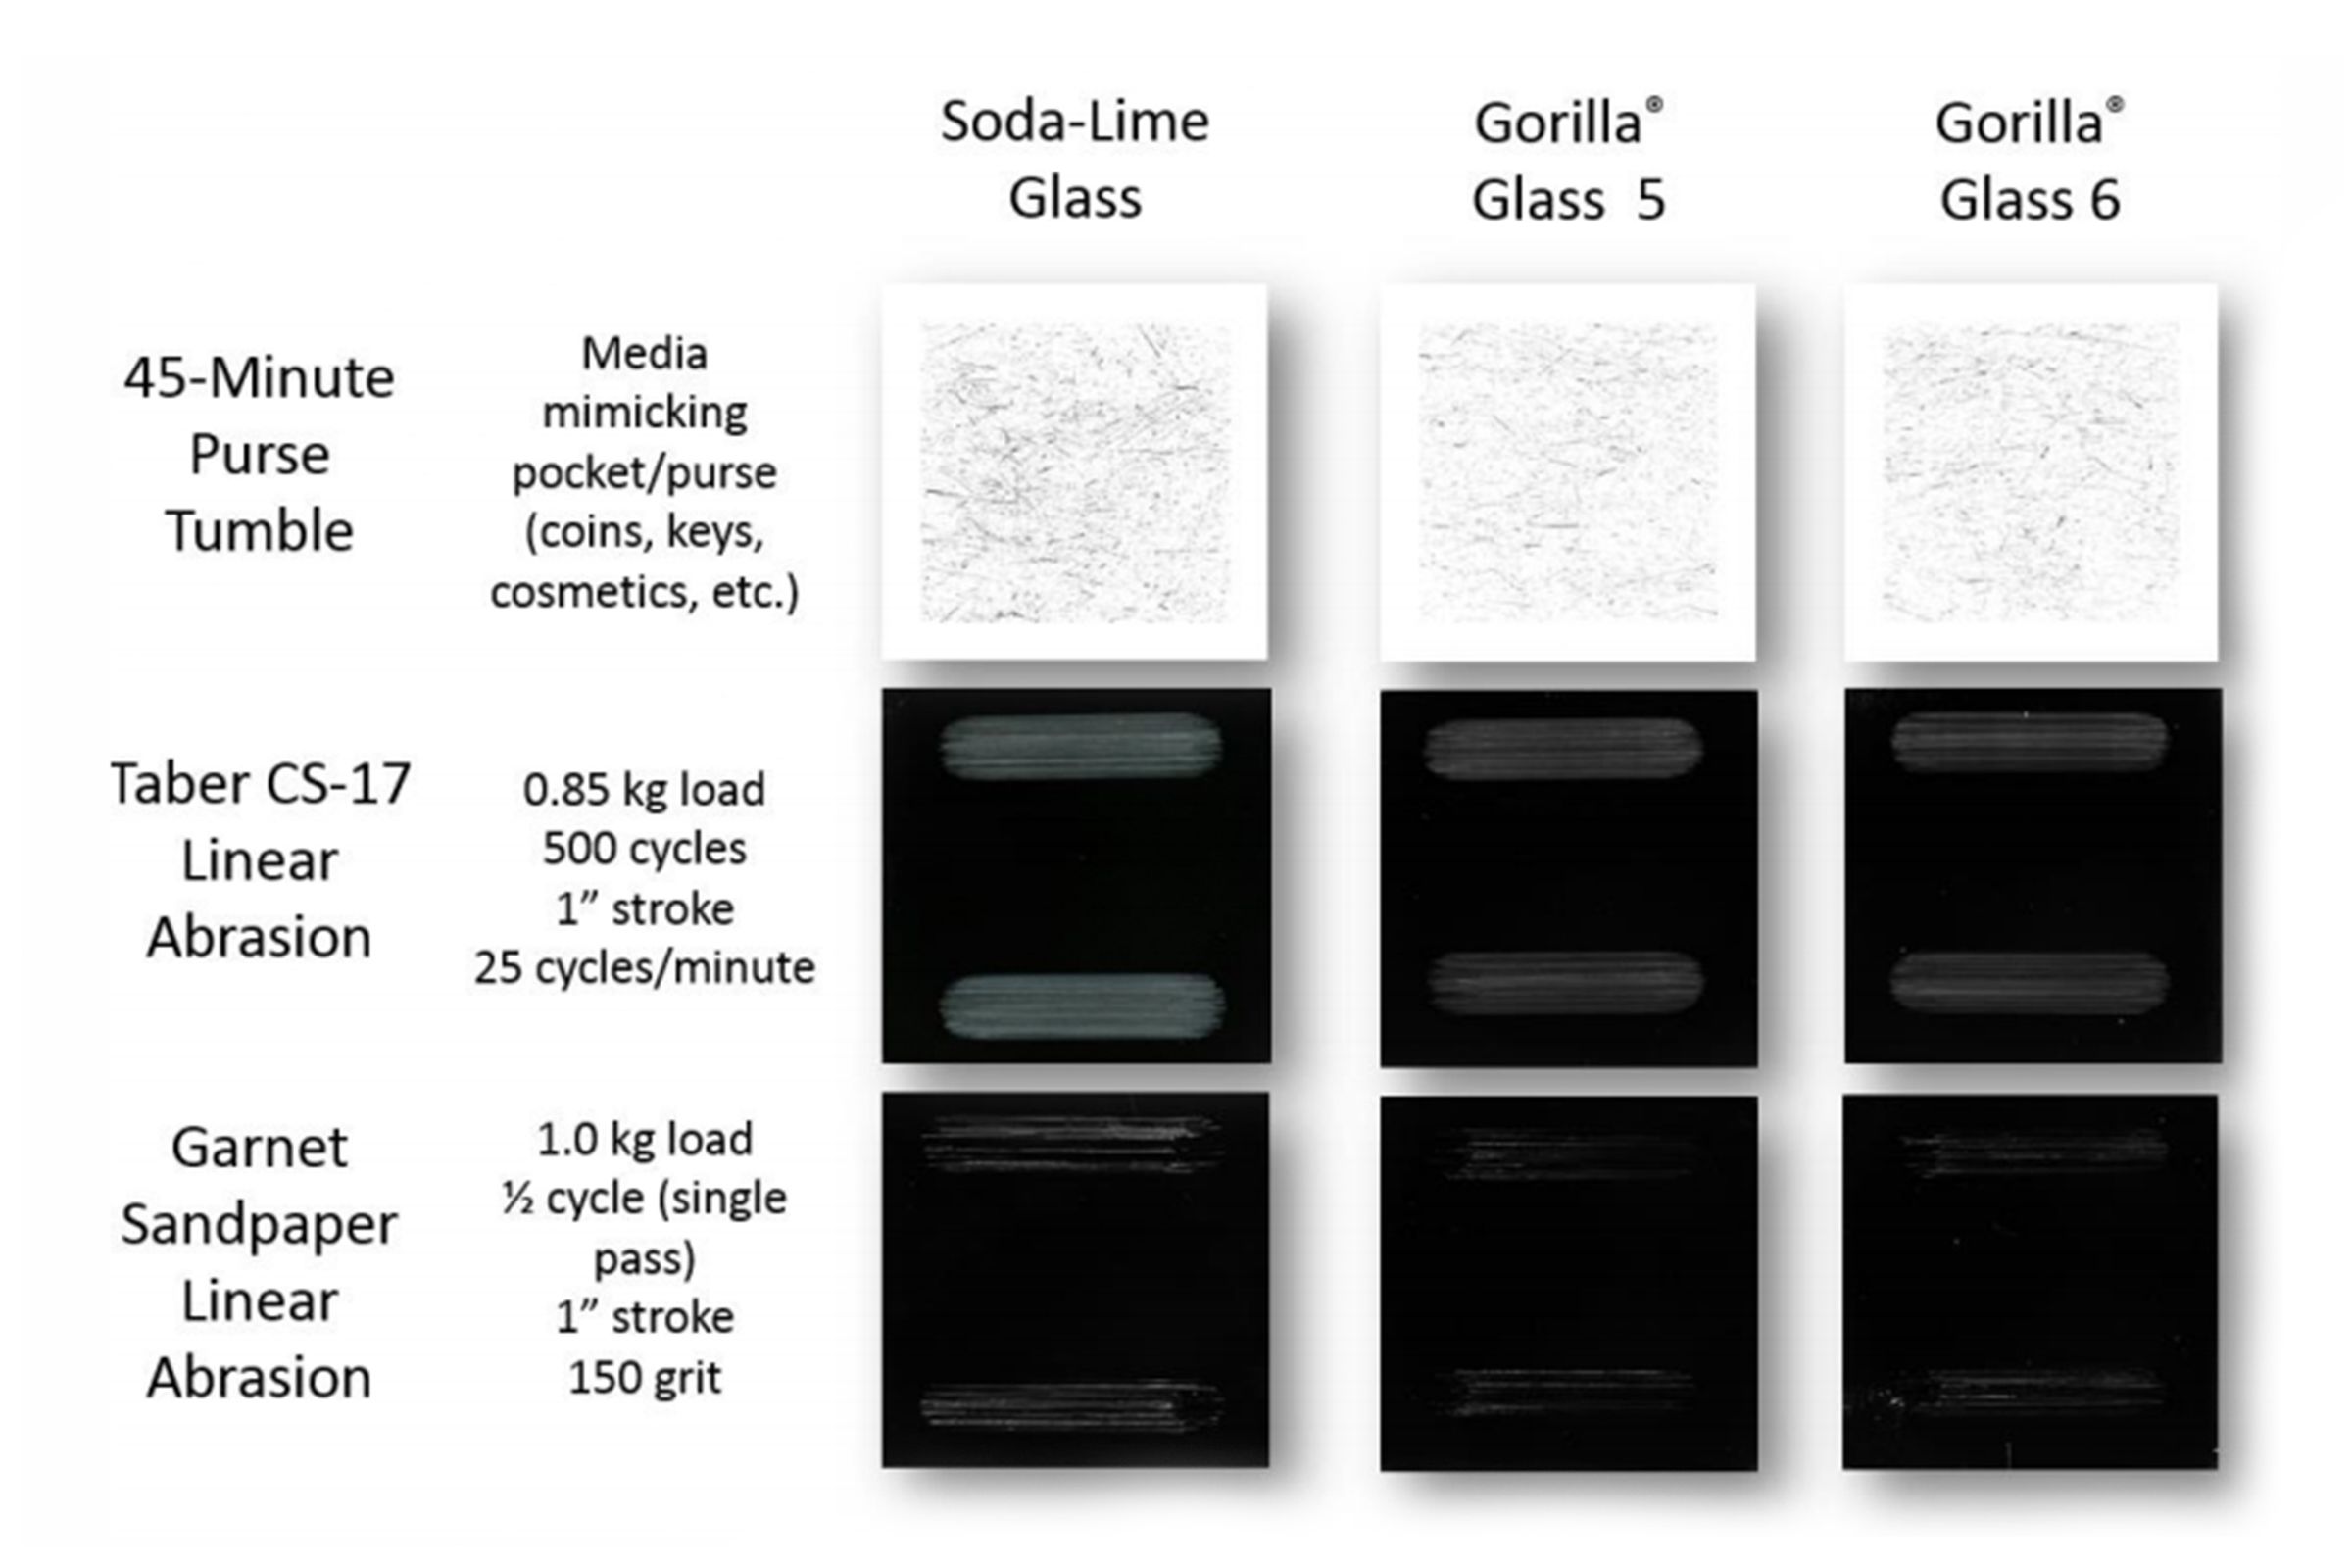 Gorilla Glass 6 comes across more scratched up than 5 on the Tumble test.